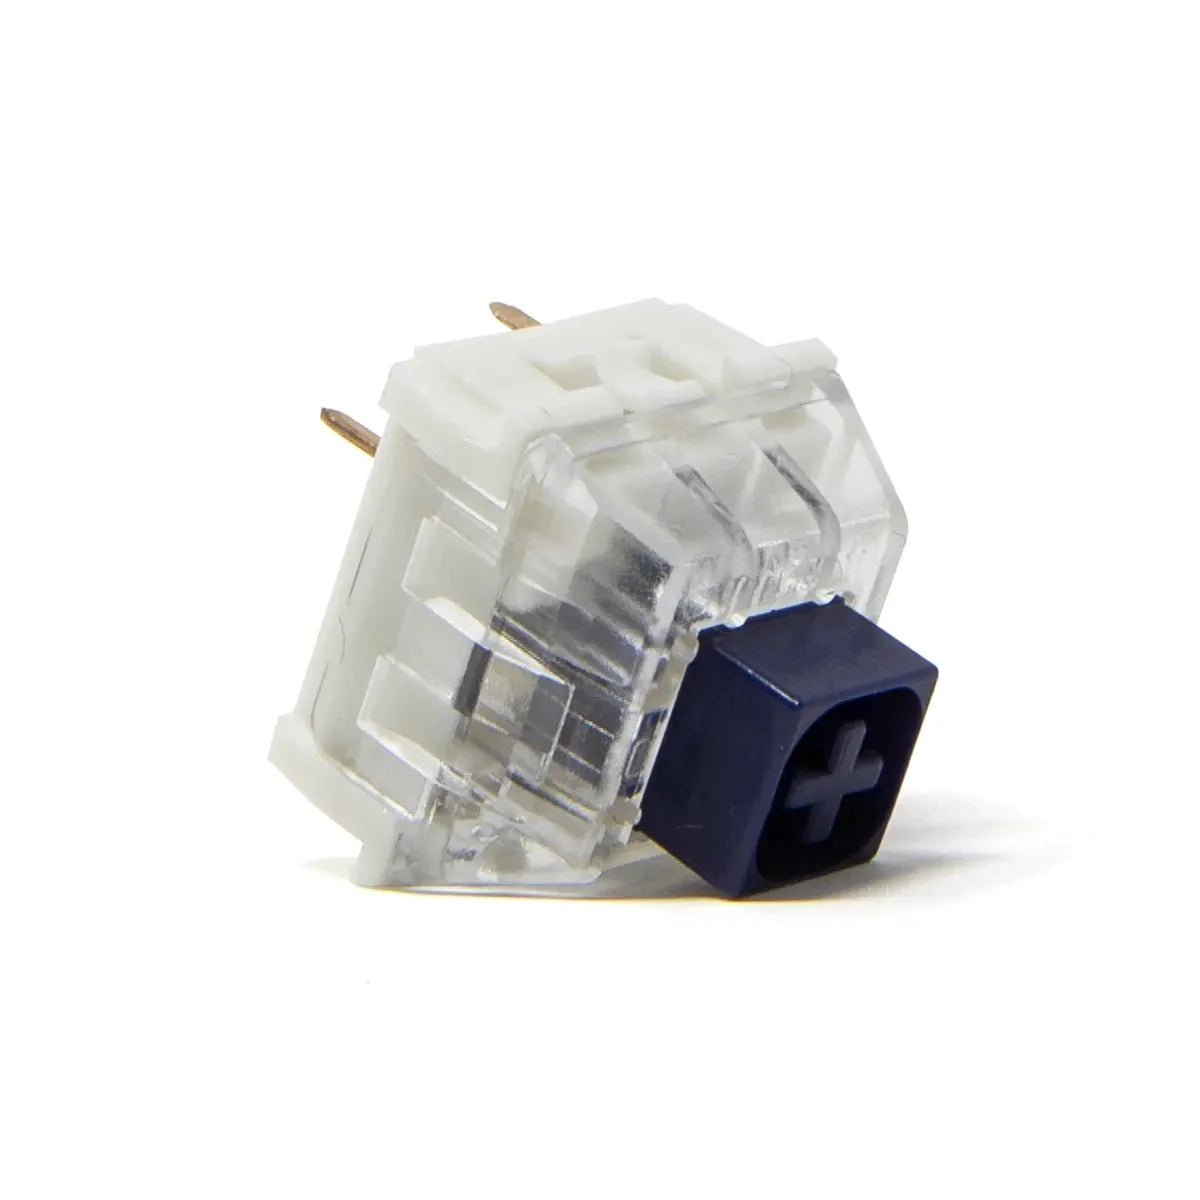 Kailh Box Navy Thick Clicky Switches - Meow Key